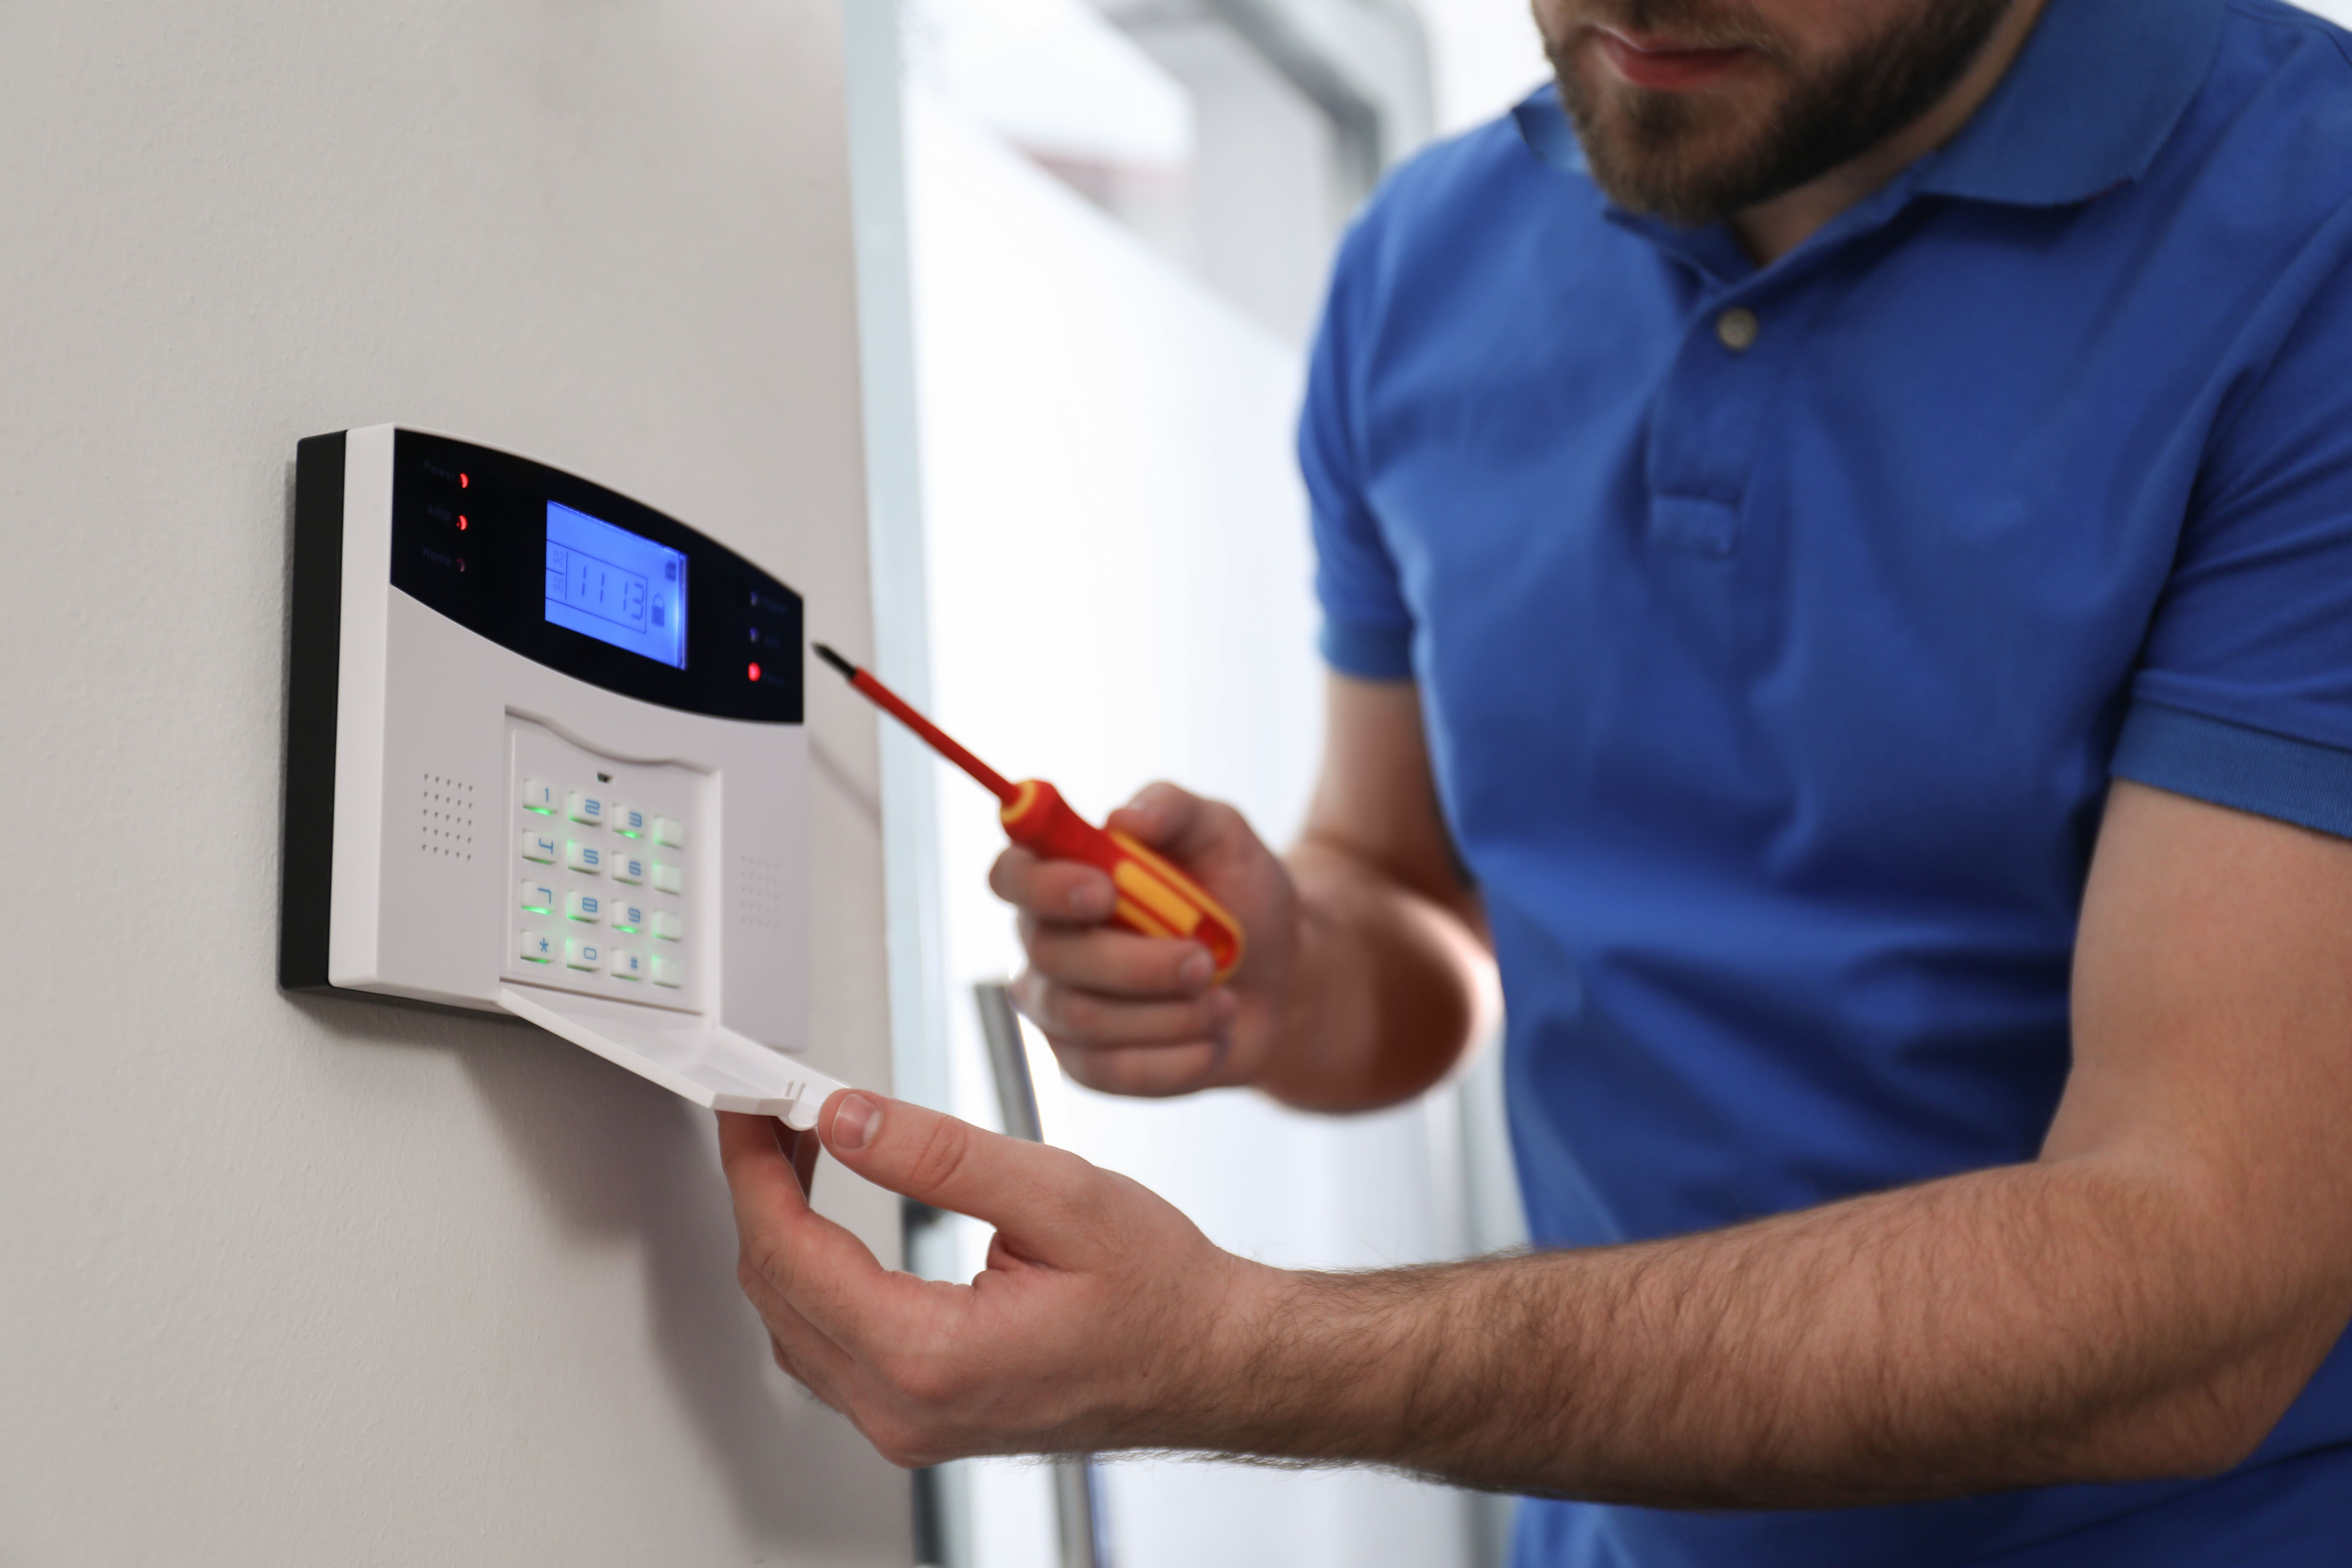 Proper installation and integration is very important while installing security systems. 